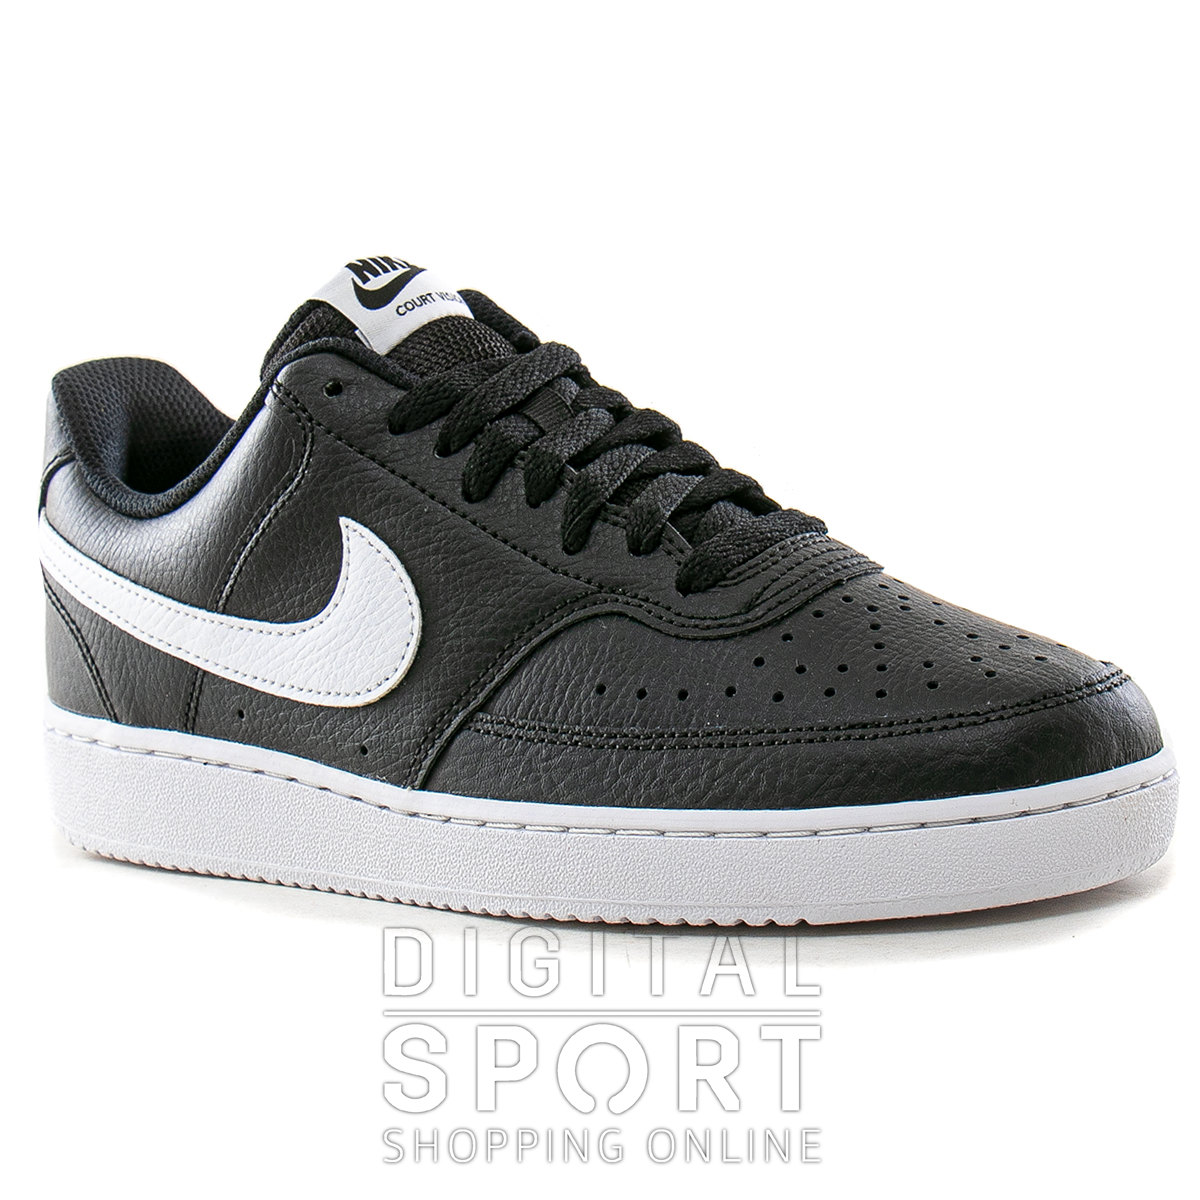 Court vision low next nature. Nike Court Low. Nike Court Vision lo CNVS. Nike Court Vision Low next nature женские. Zapatillas Nike Court Vision Low.